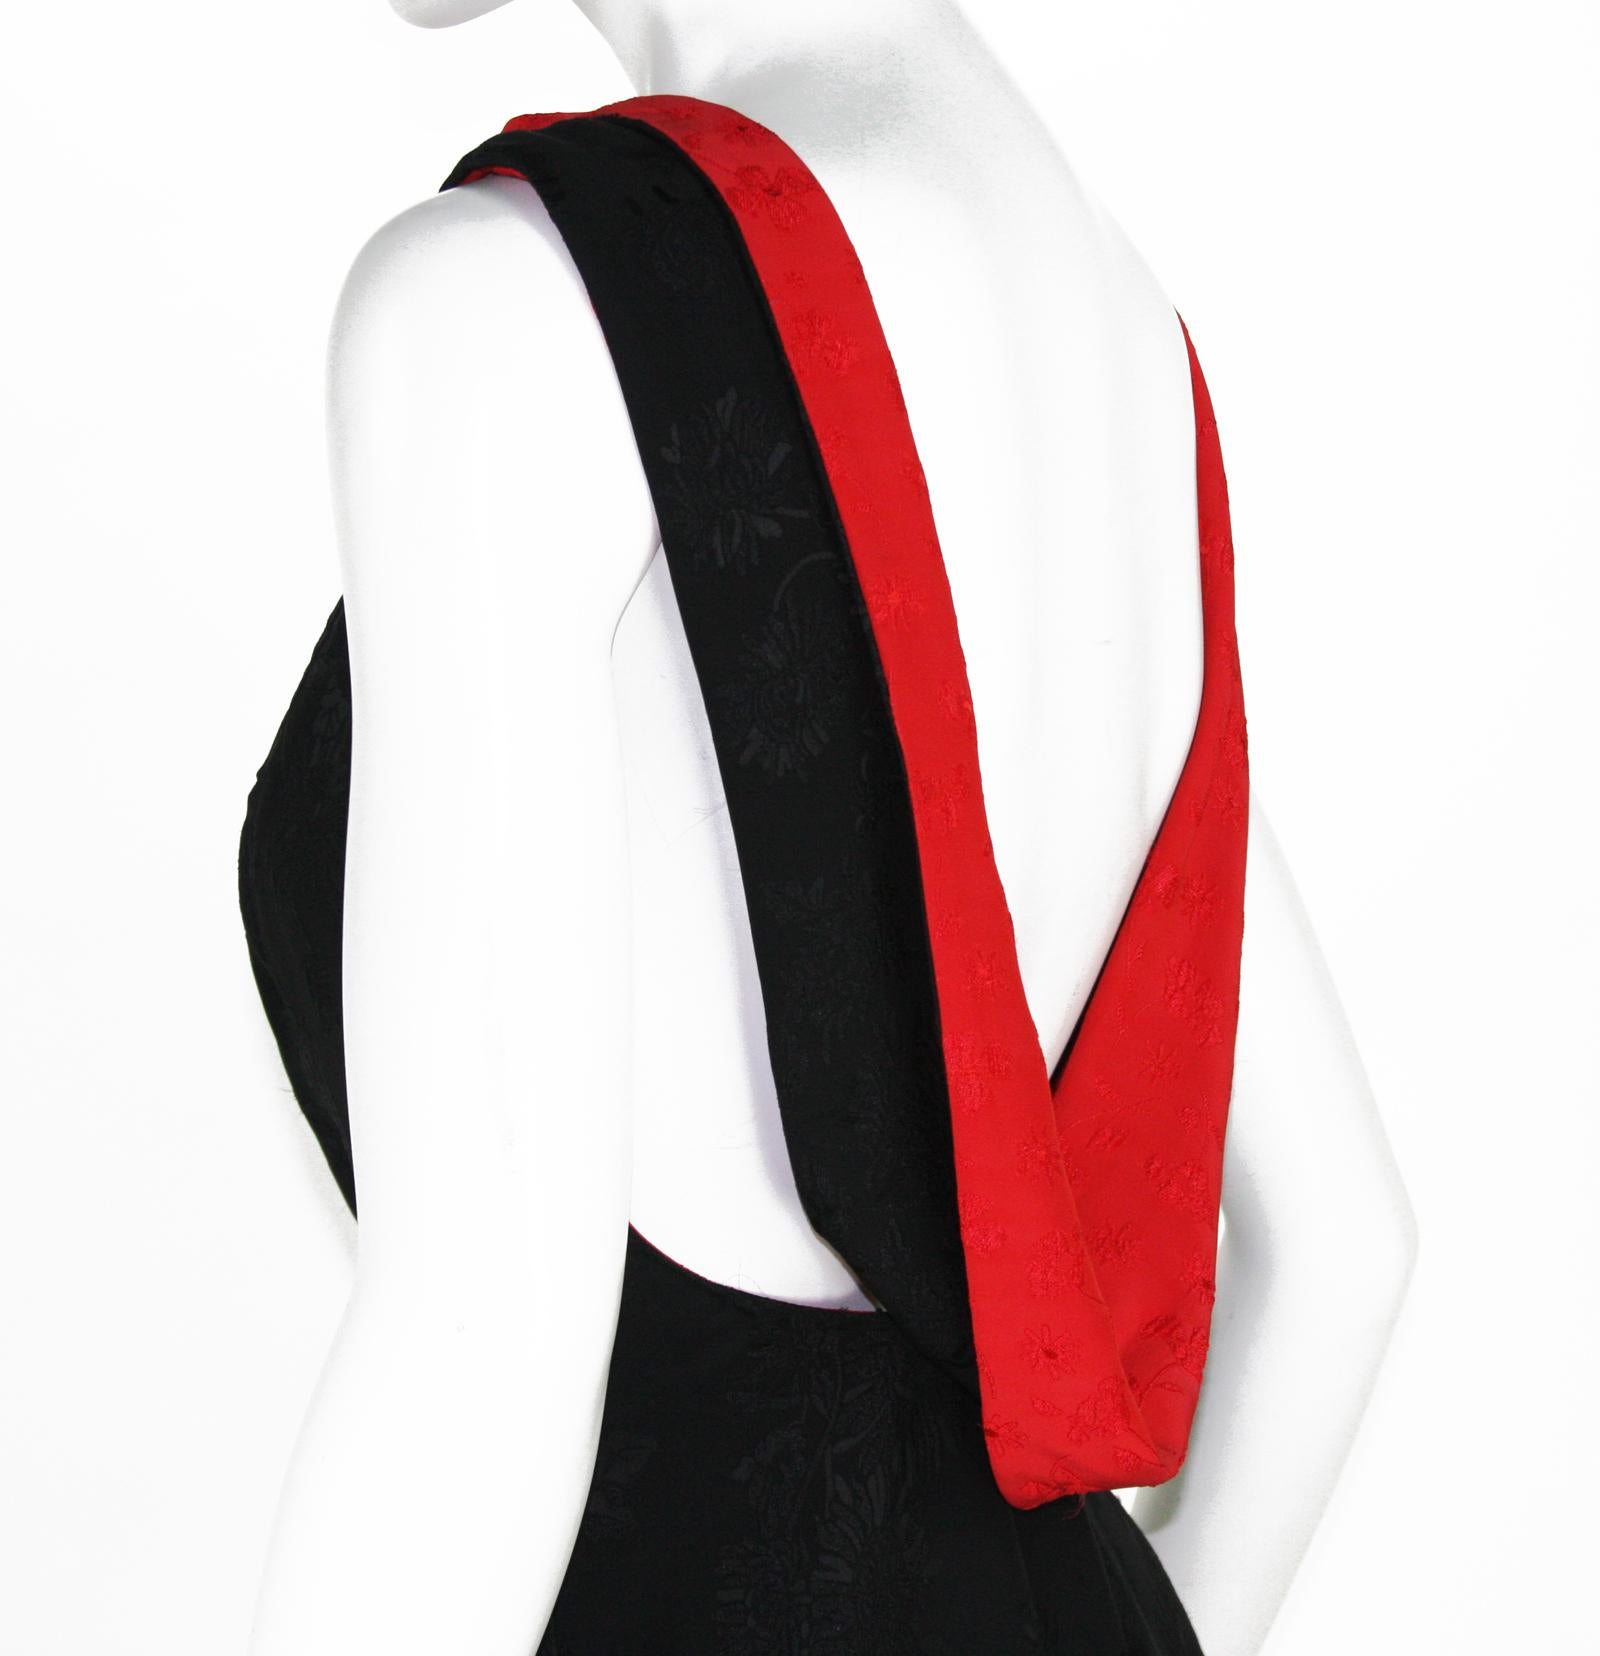 Gianni Versace Couture S/S 1998 Collection Black and Red Open Back Dress Gown  For Sale 3